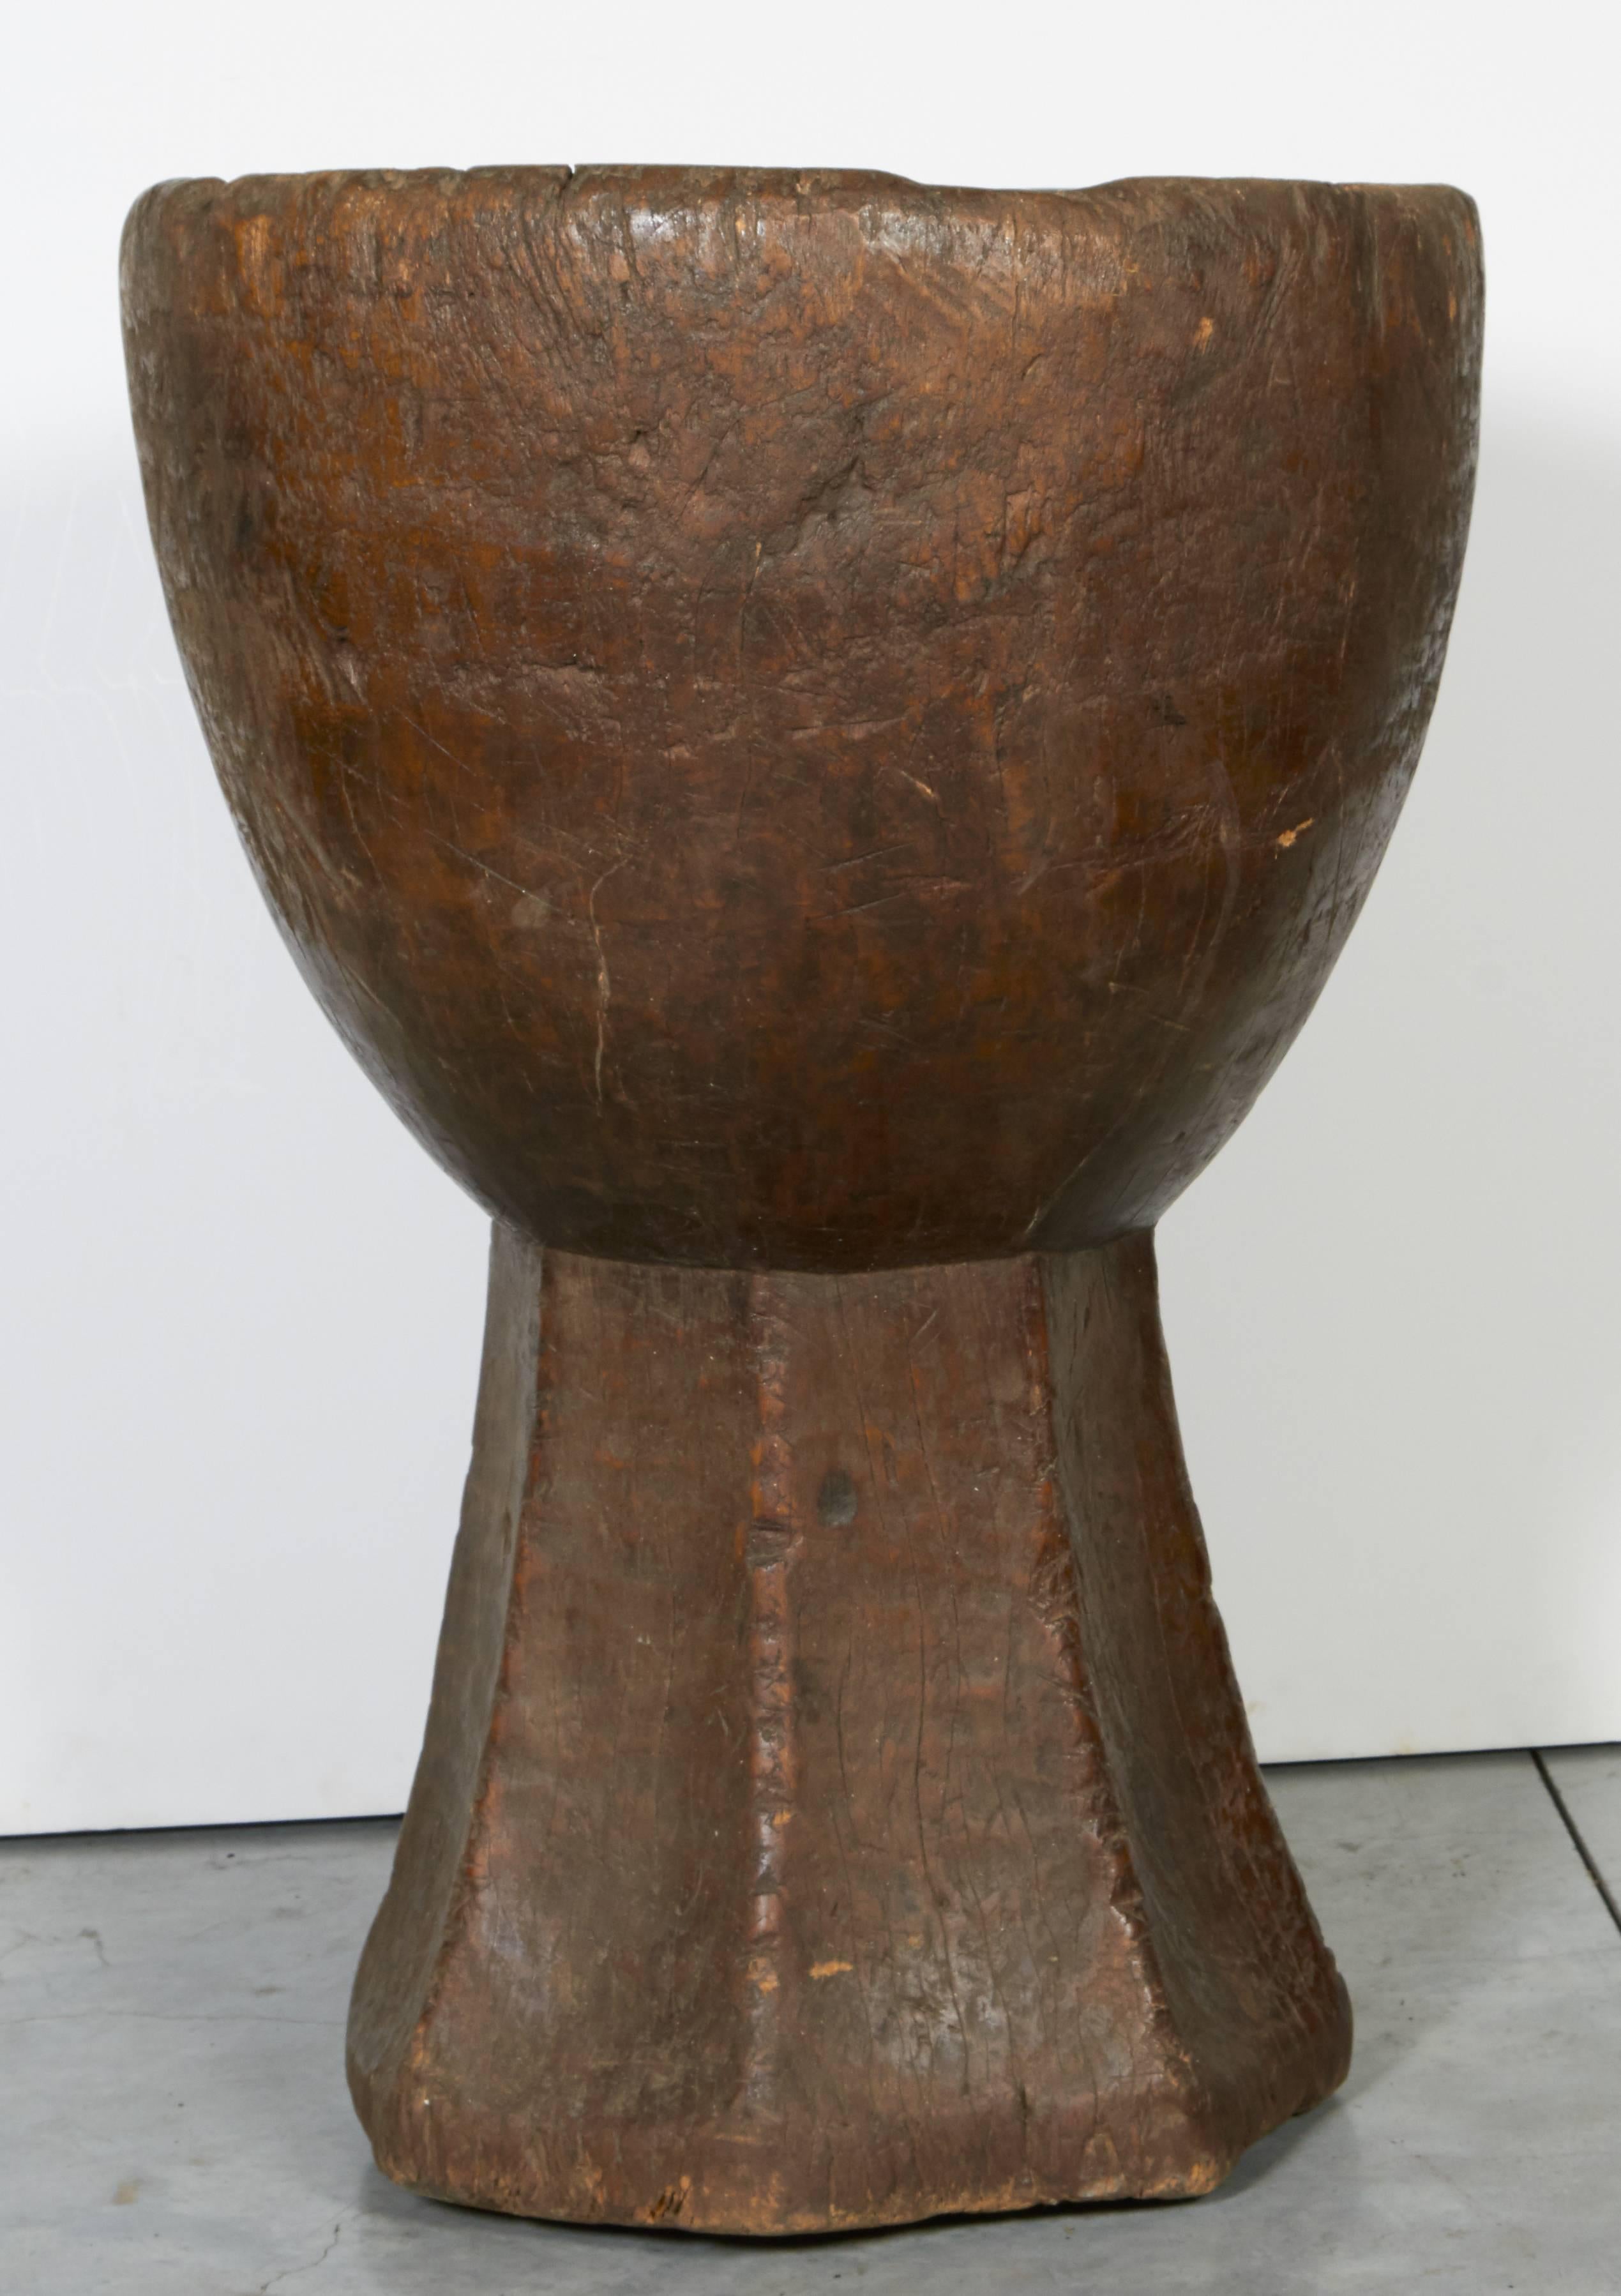 A gracefully shaped, wide mouth mortar with beautiful patina, carved out of a single piece of teakwood. From Java, Indonesia, circa 1930s.
M2020.